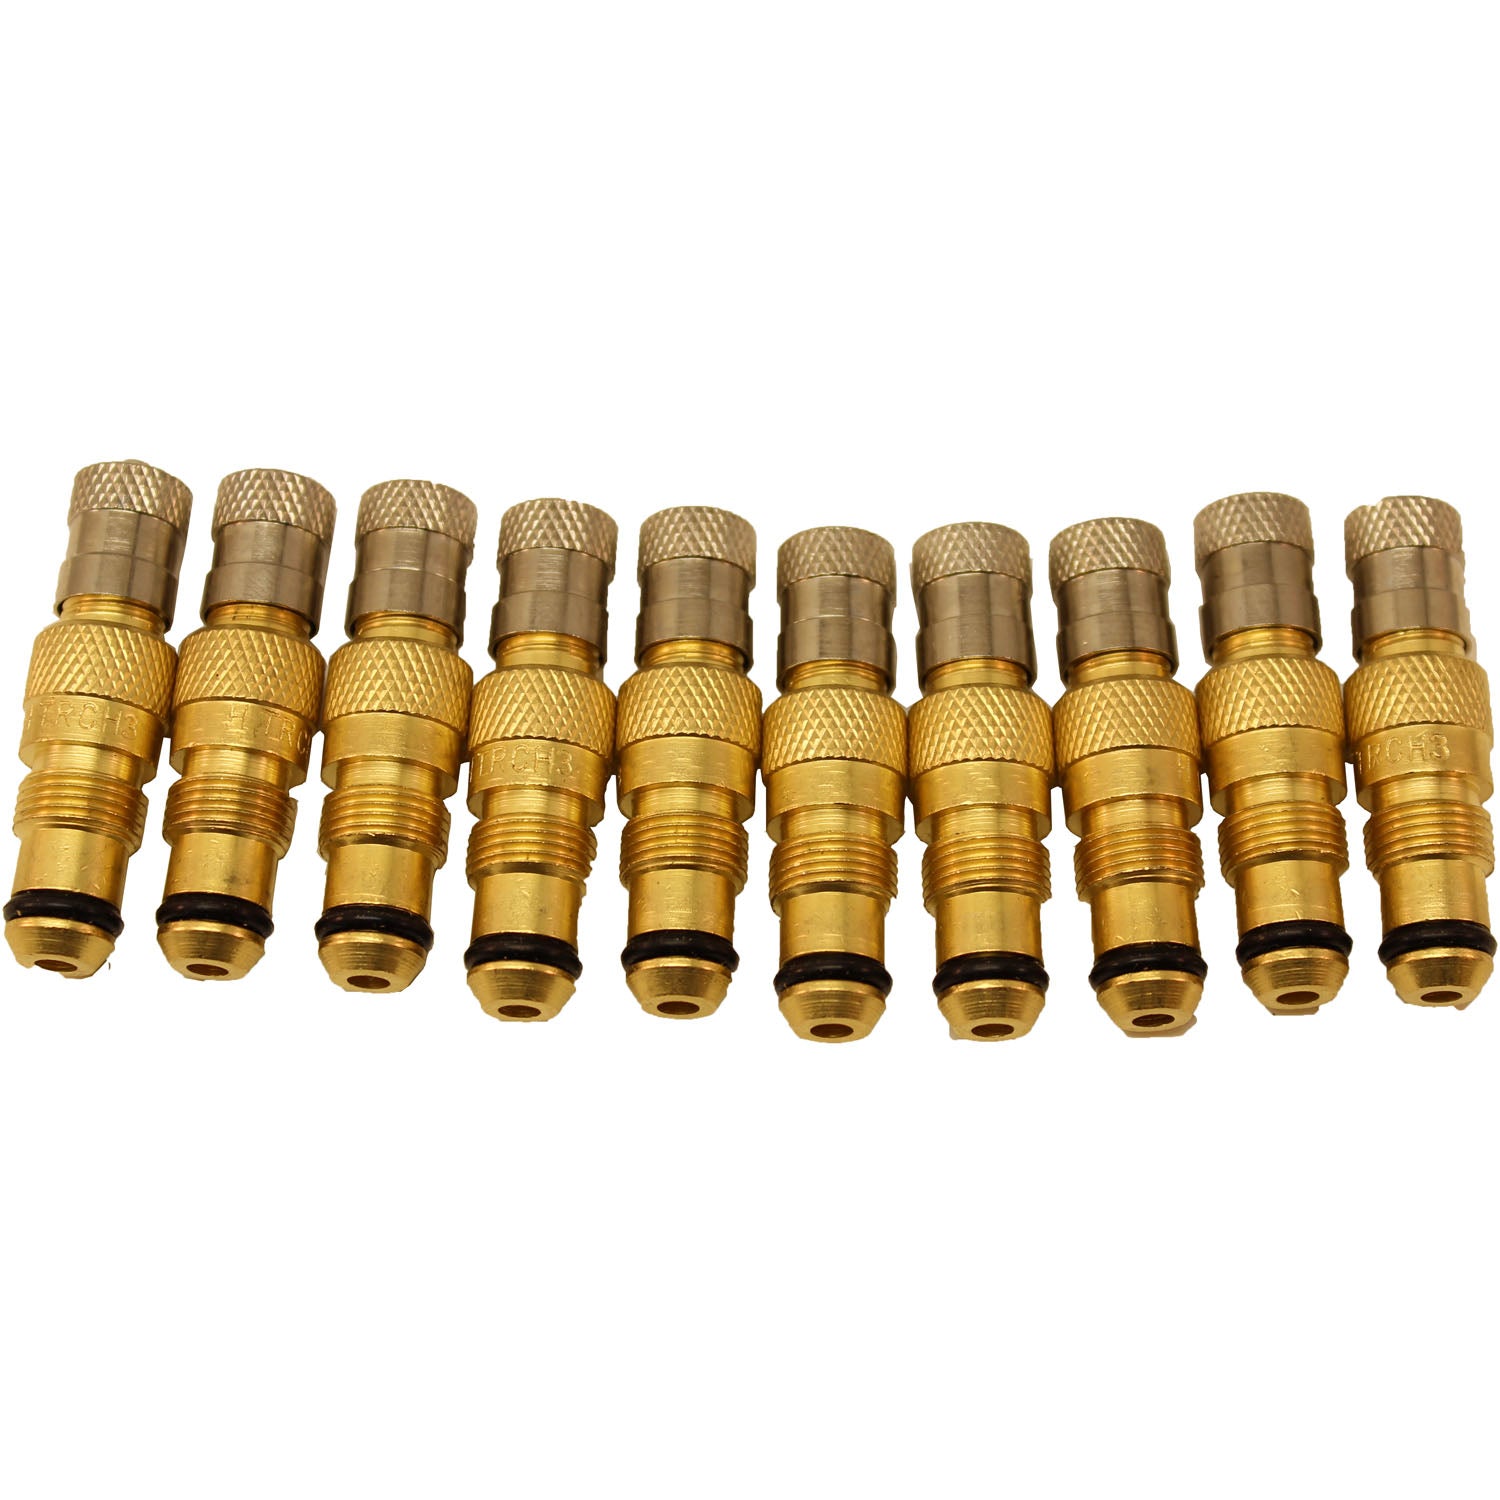 Dill CH3 Tractor Air Water Tire Valve Stem Core Housing Pack of 10